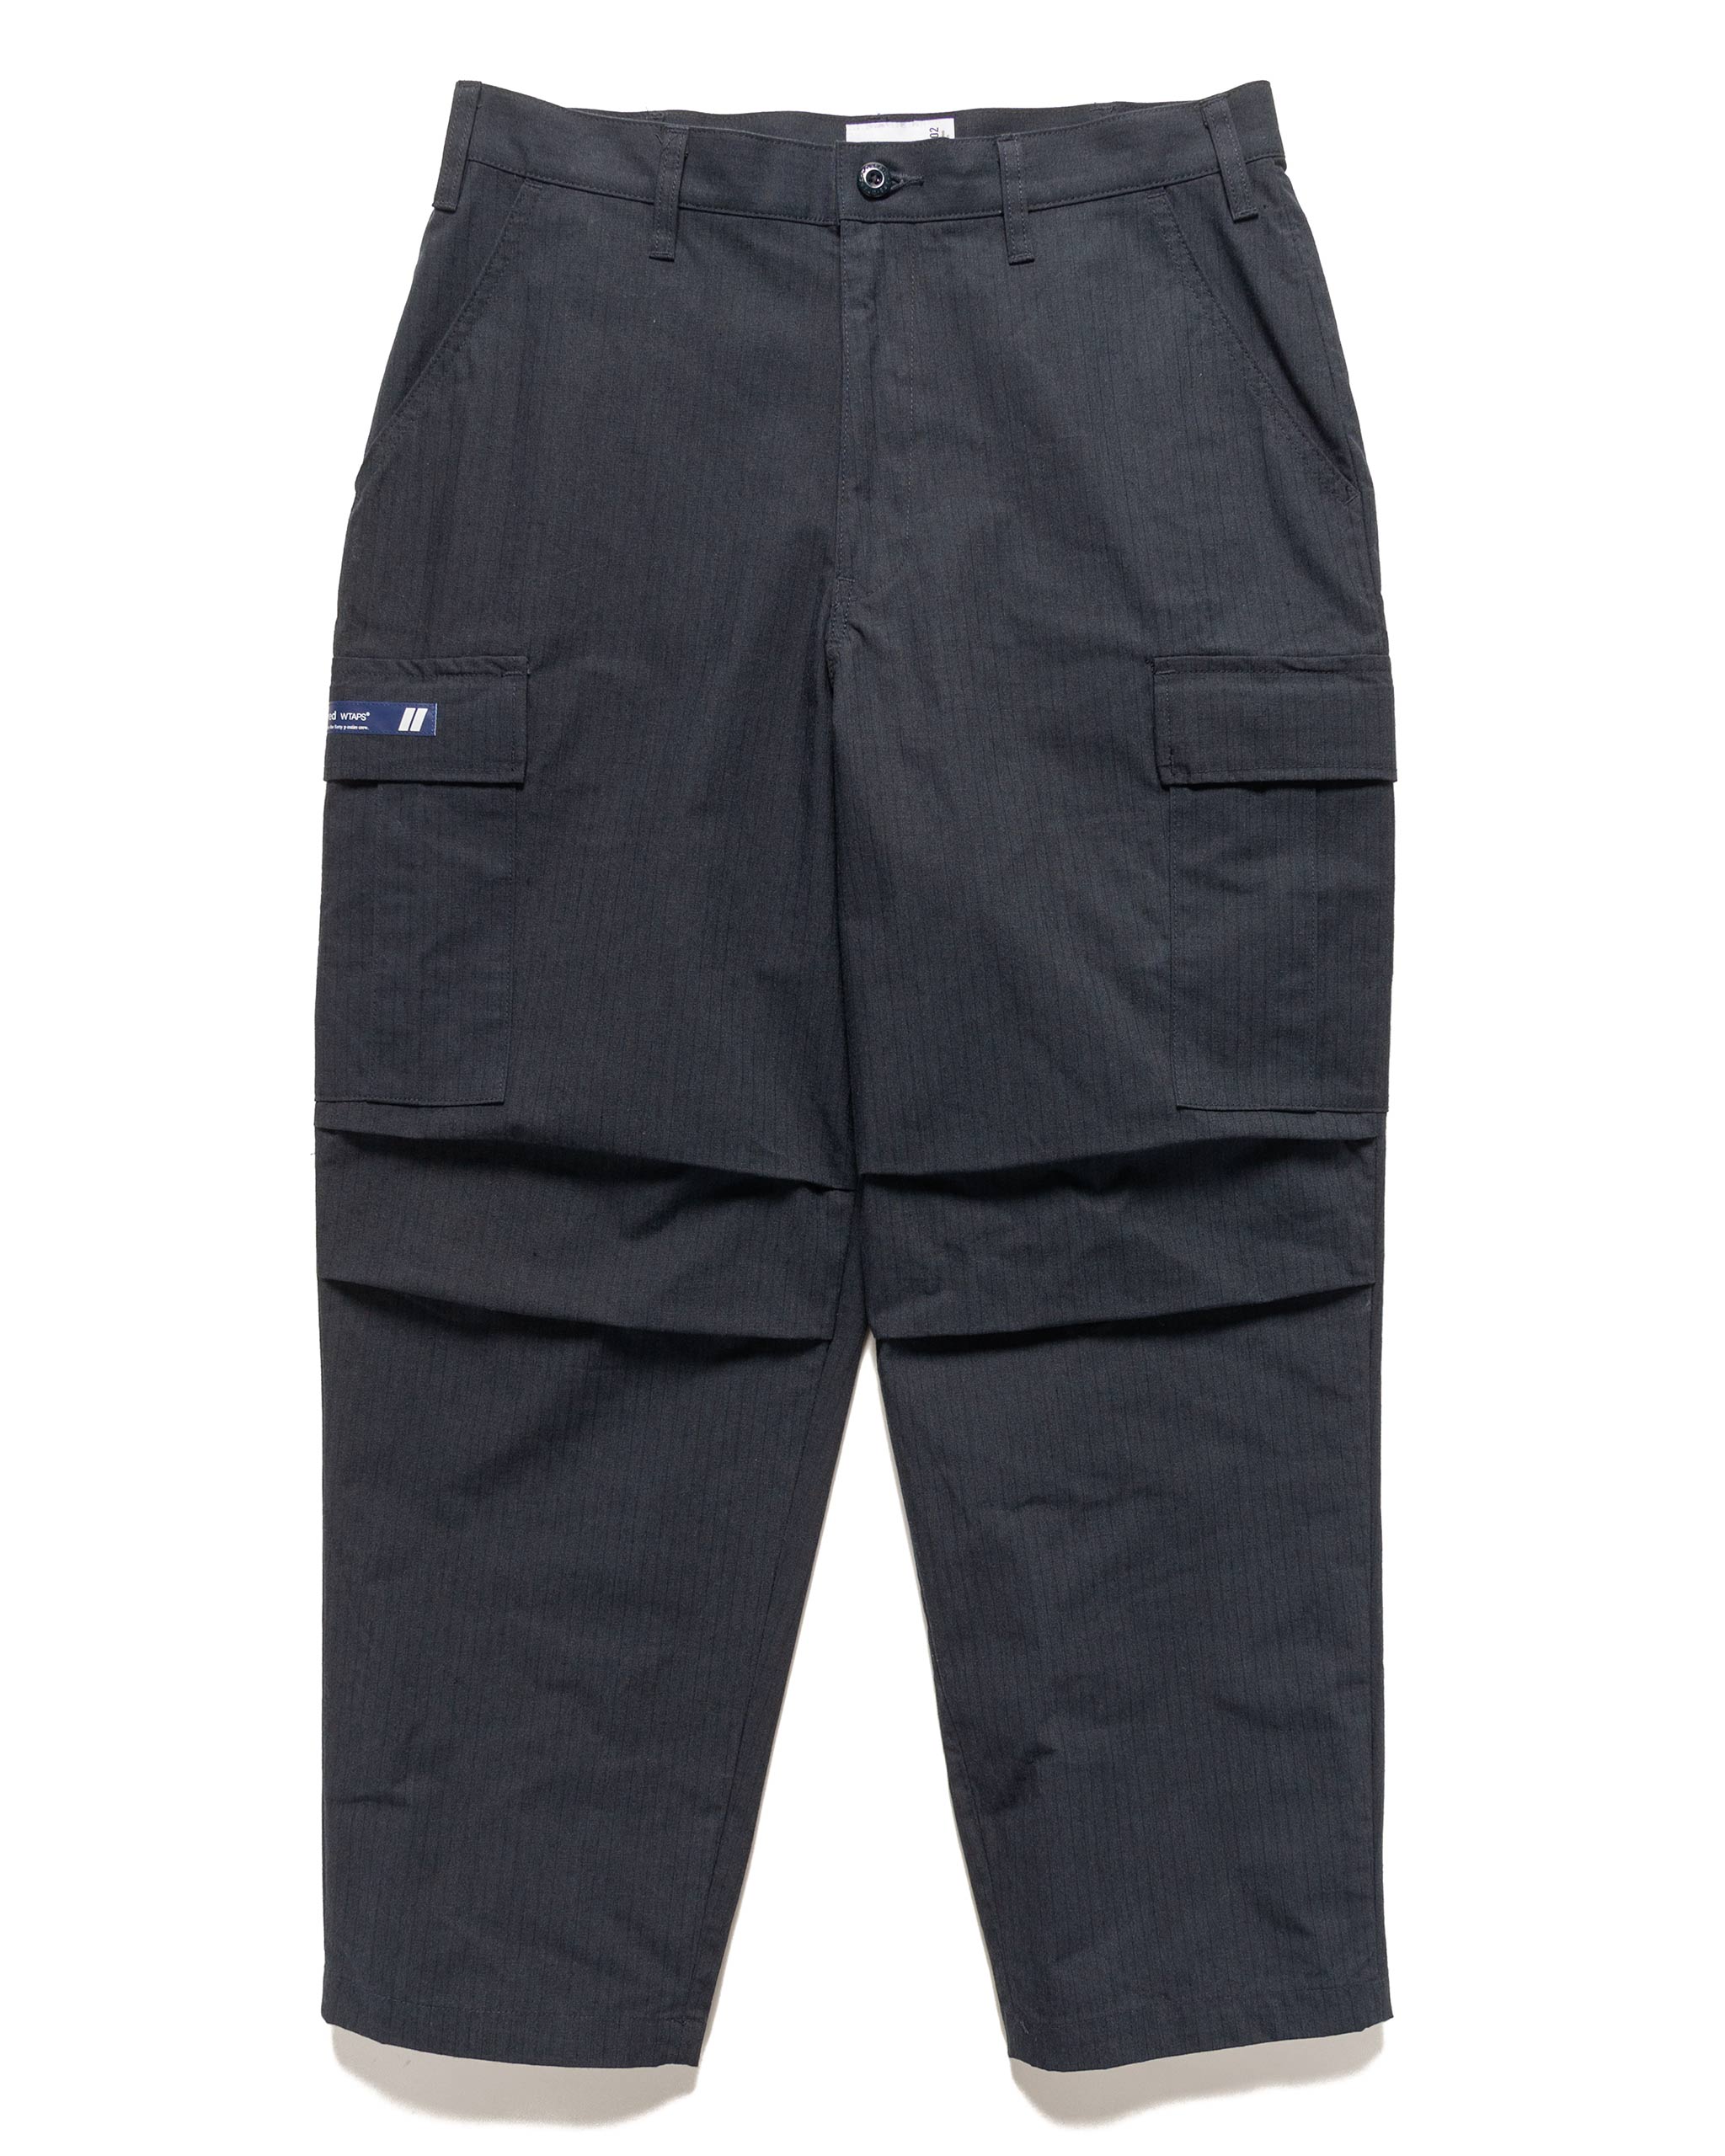 MILT9602 / Trousers / NYCO. Ripstop Navy | HAVEN